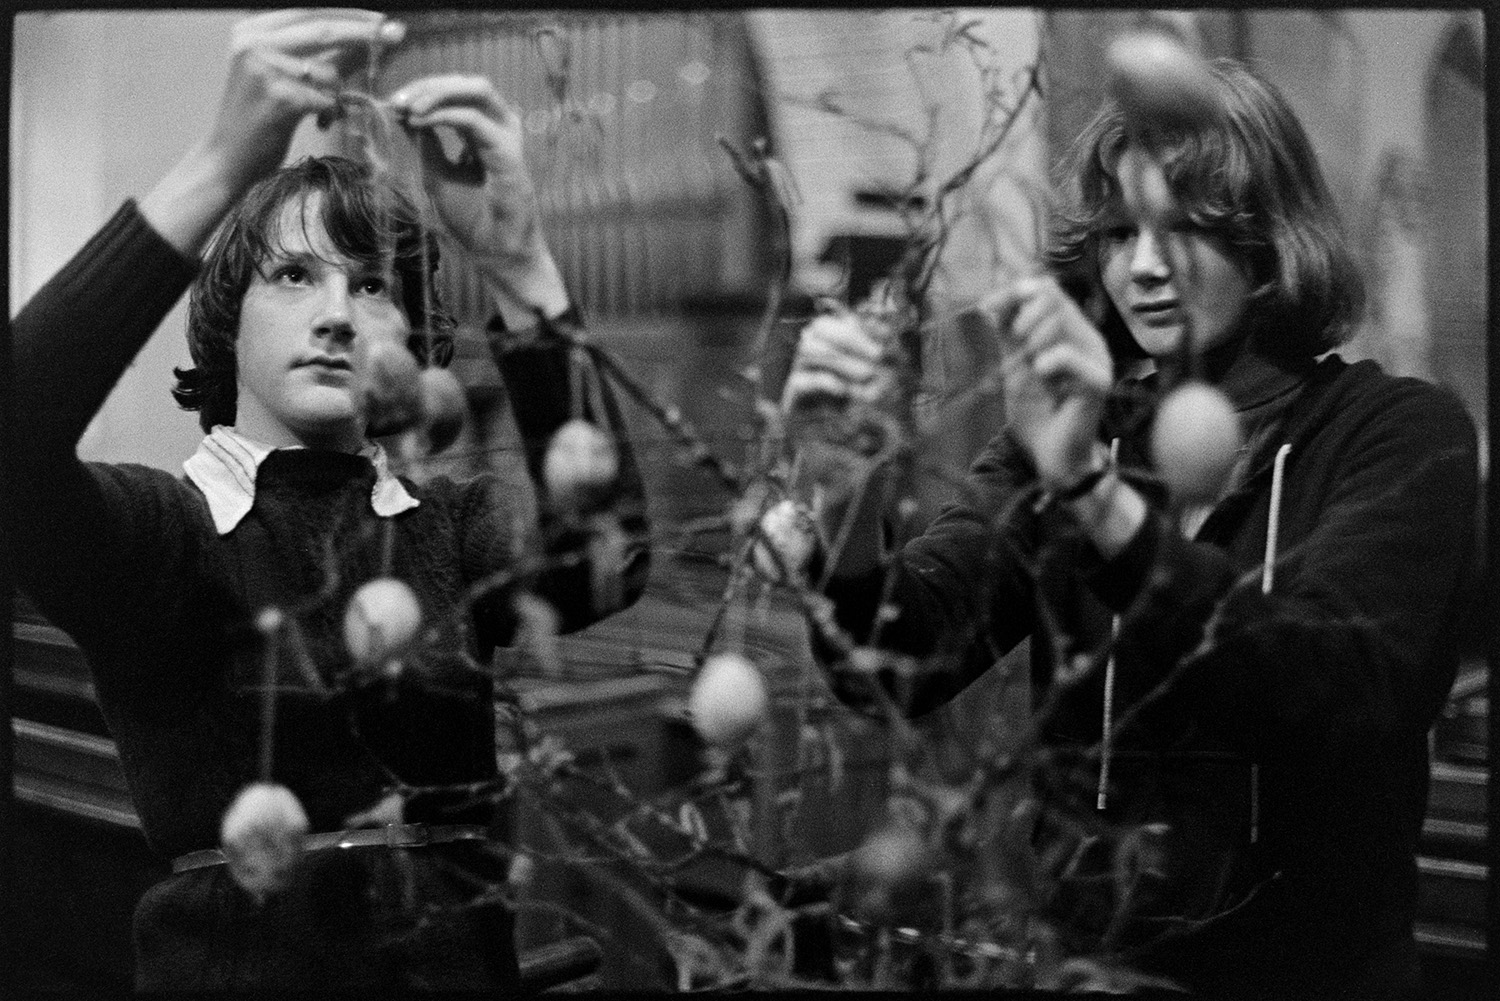 Women decorating church for Easter.
[Two young women decorating tree branches with eggs for Easter in Dolton Church.]